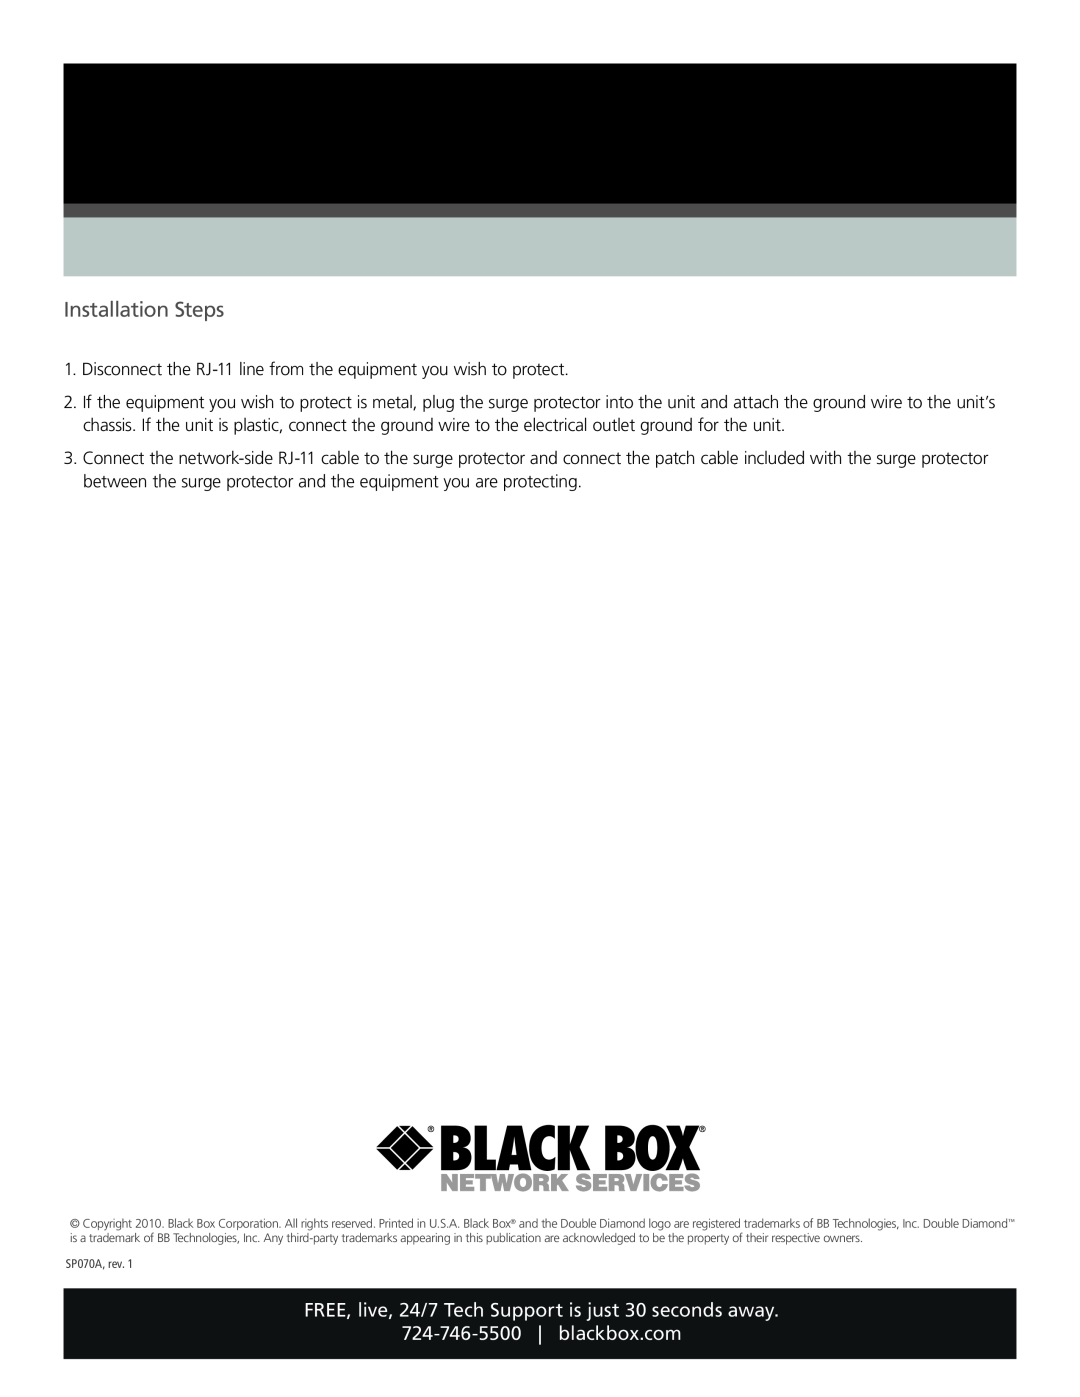 Black Box SP070A specifications Installation Steps, FREE, live, 24/7 Tech Support is just 30 seconds away 